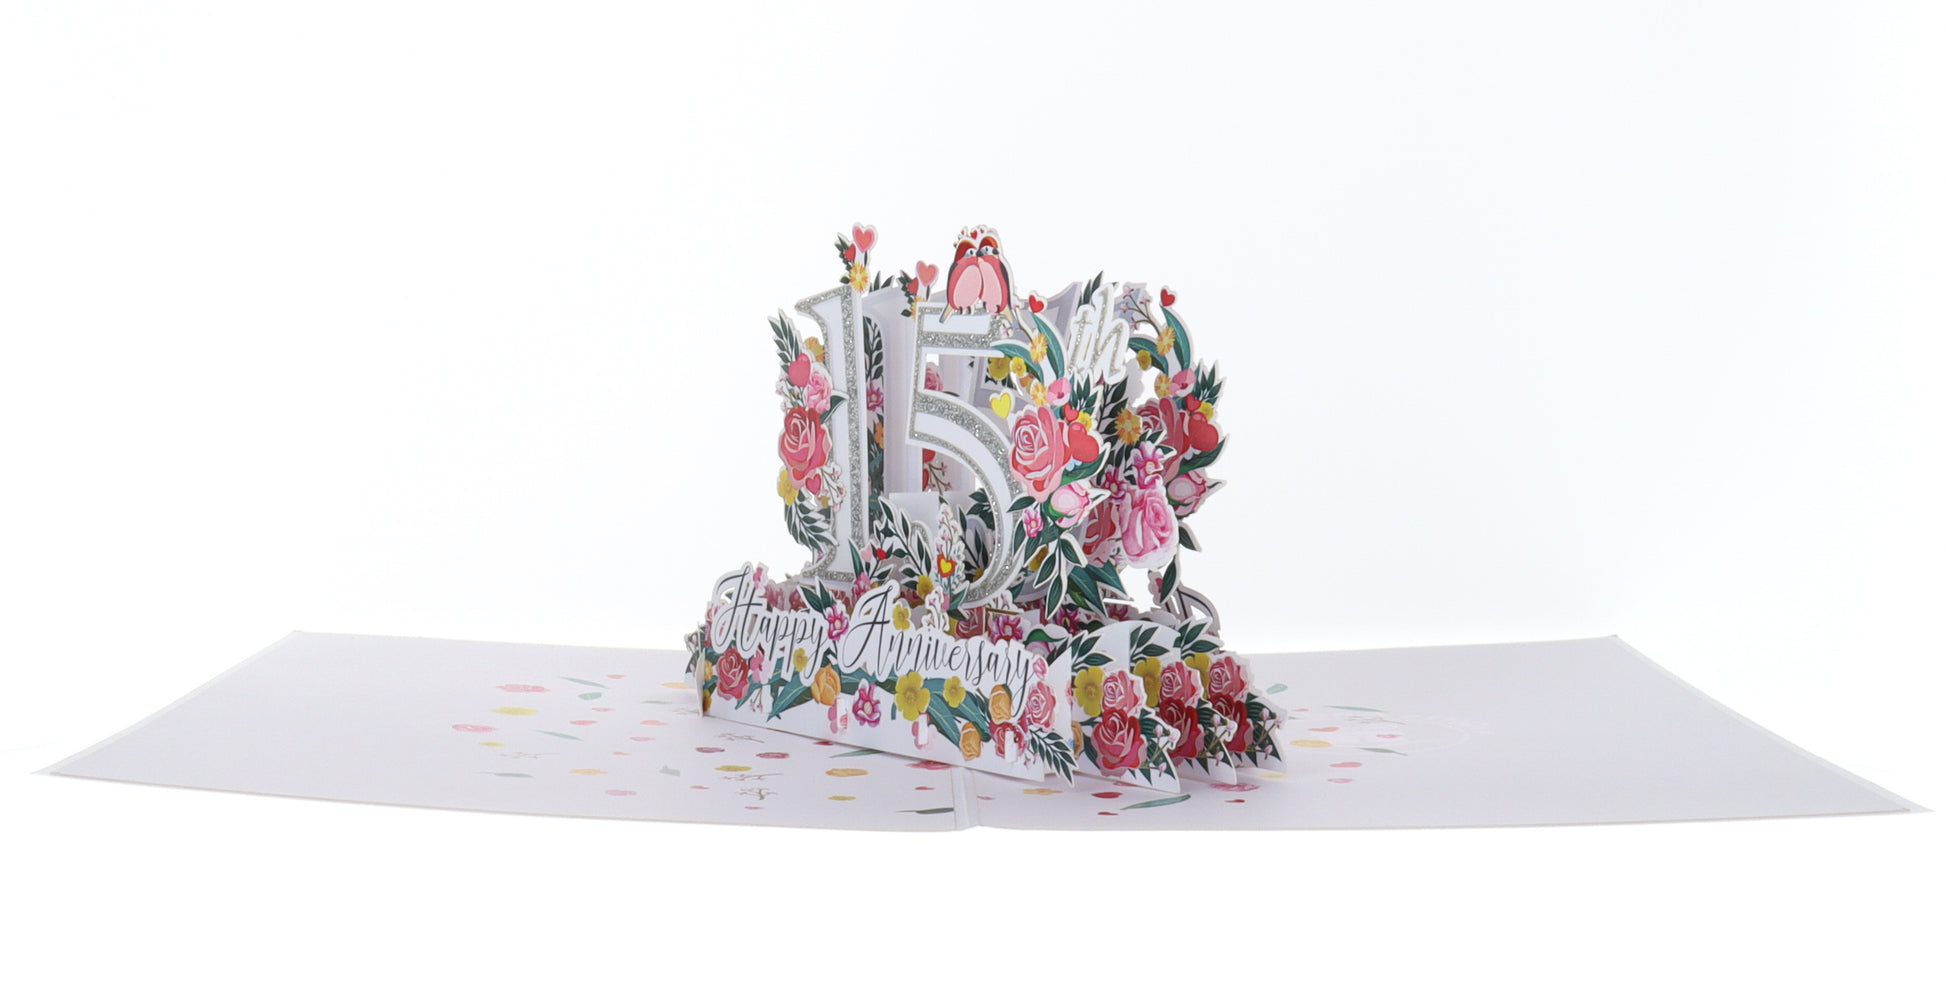 Happy 15th Milestone Anniversary 3D Pop Up Greeting Card - 15th Anniversary Being Together - 15th We - iGifts And Cards